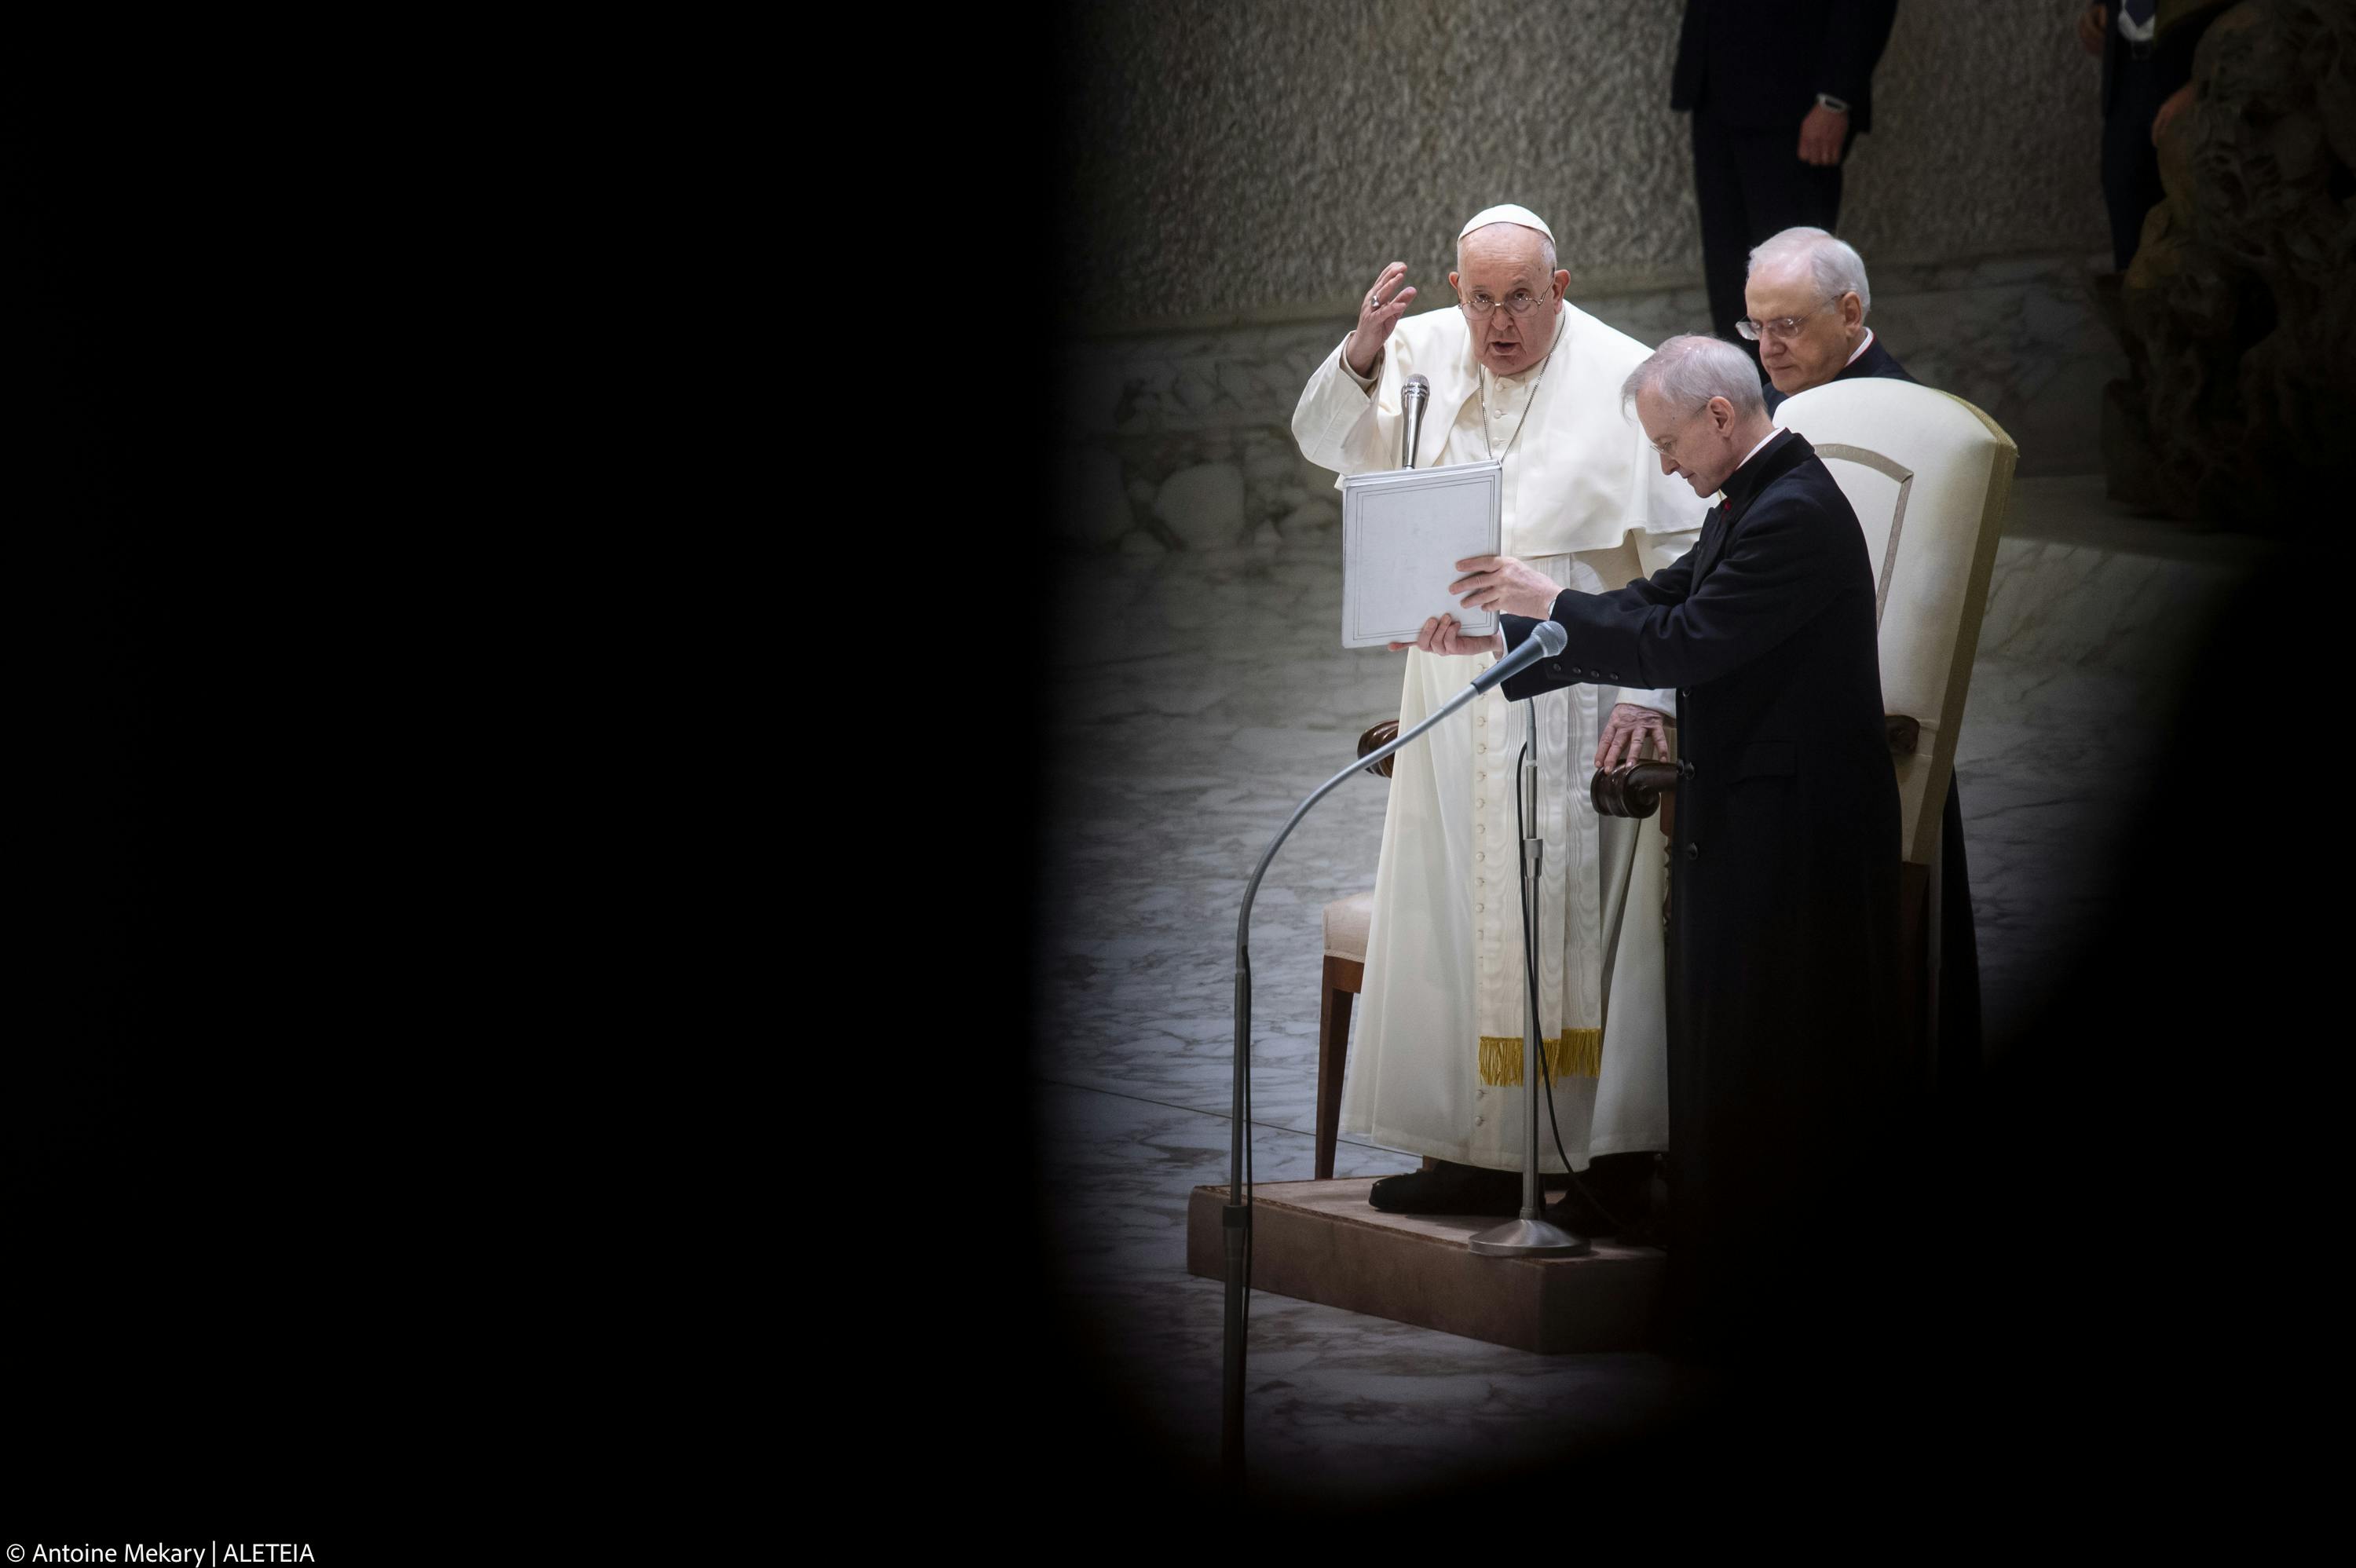 Church unity: Pope Francis faces 3 difficult situations